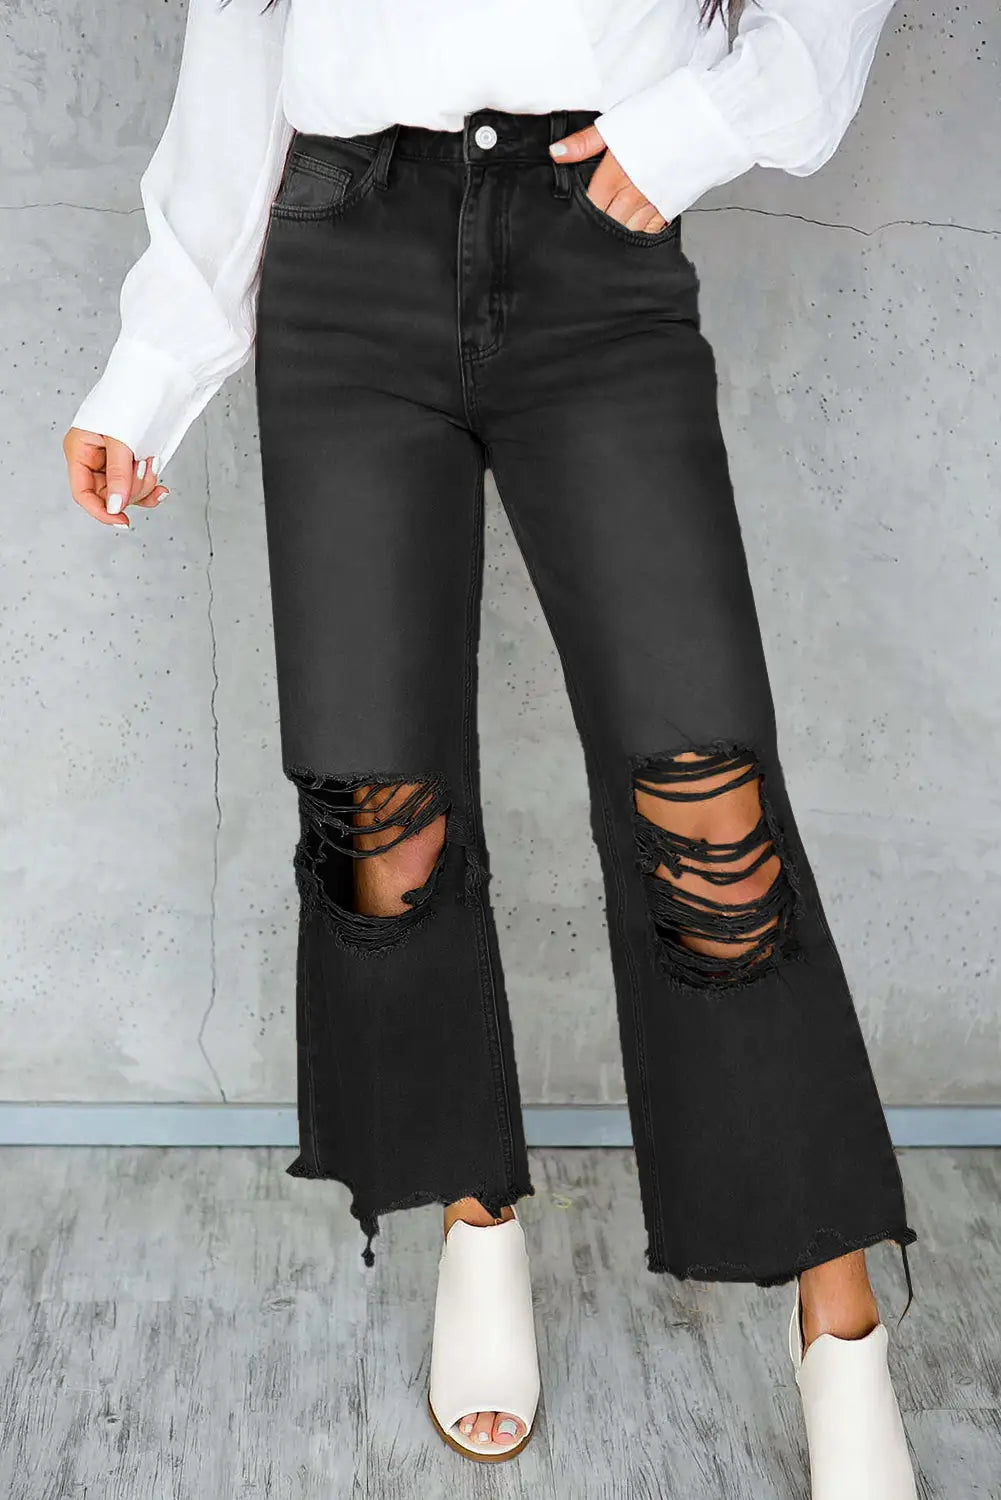 Black distressed hollow-out high waist cropped flare jeans - 10 / 100% cotton